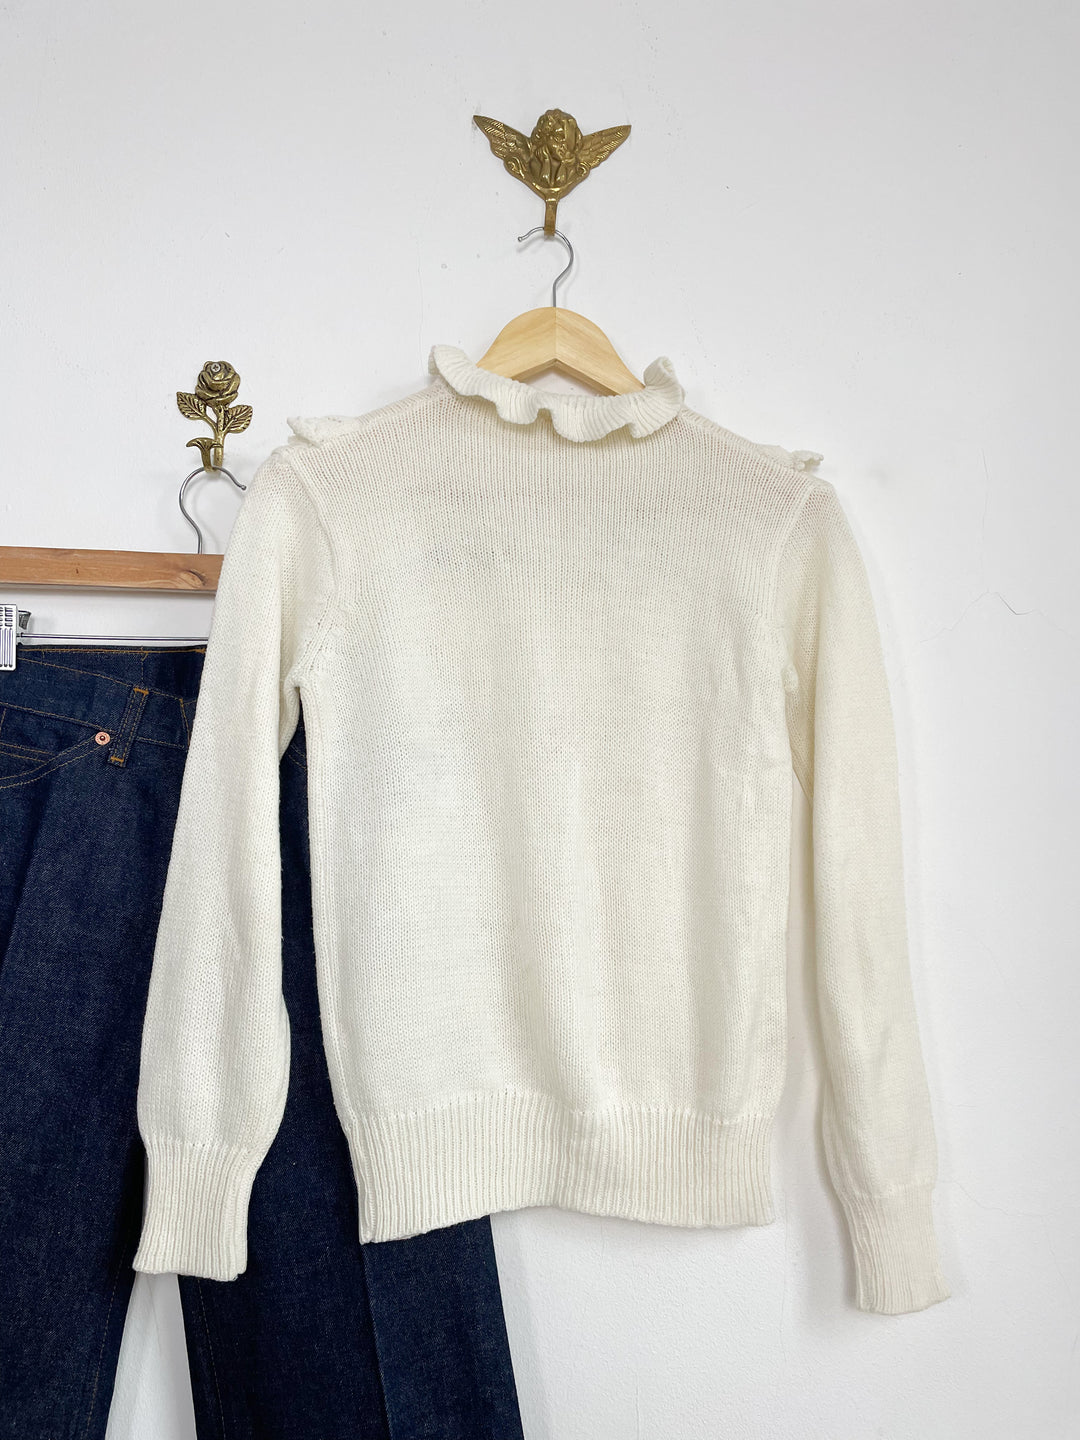 The Ditsy Knit Sweater